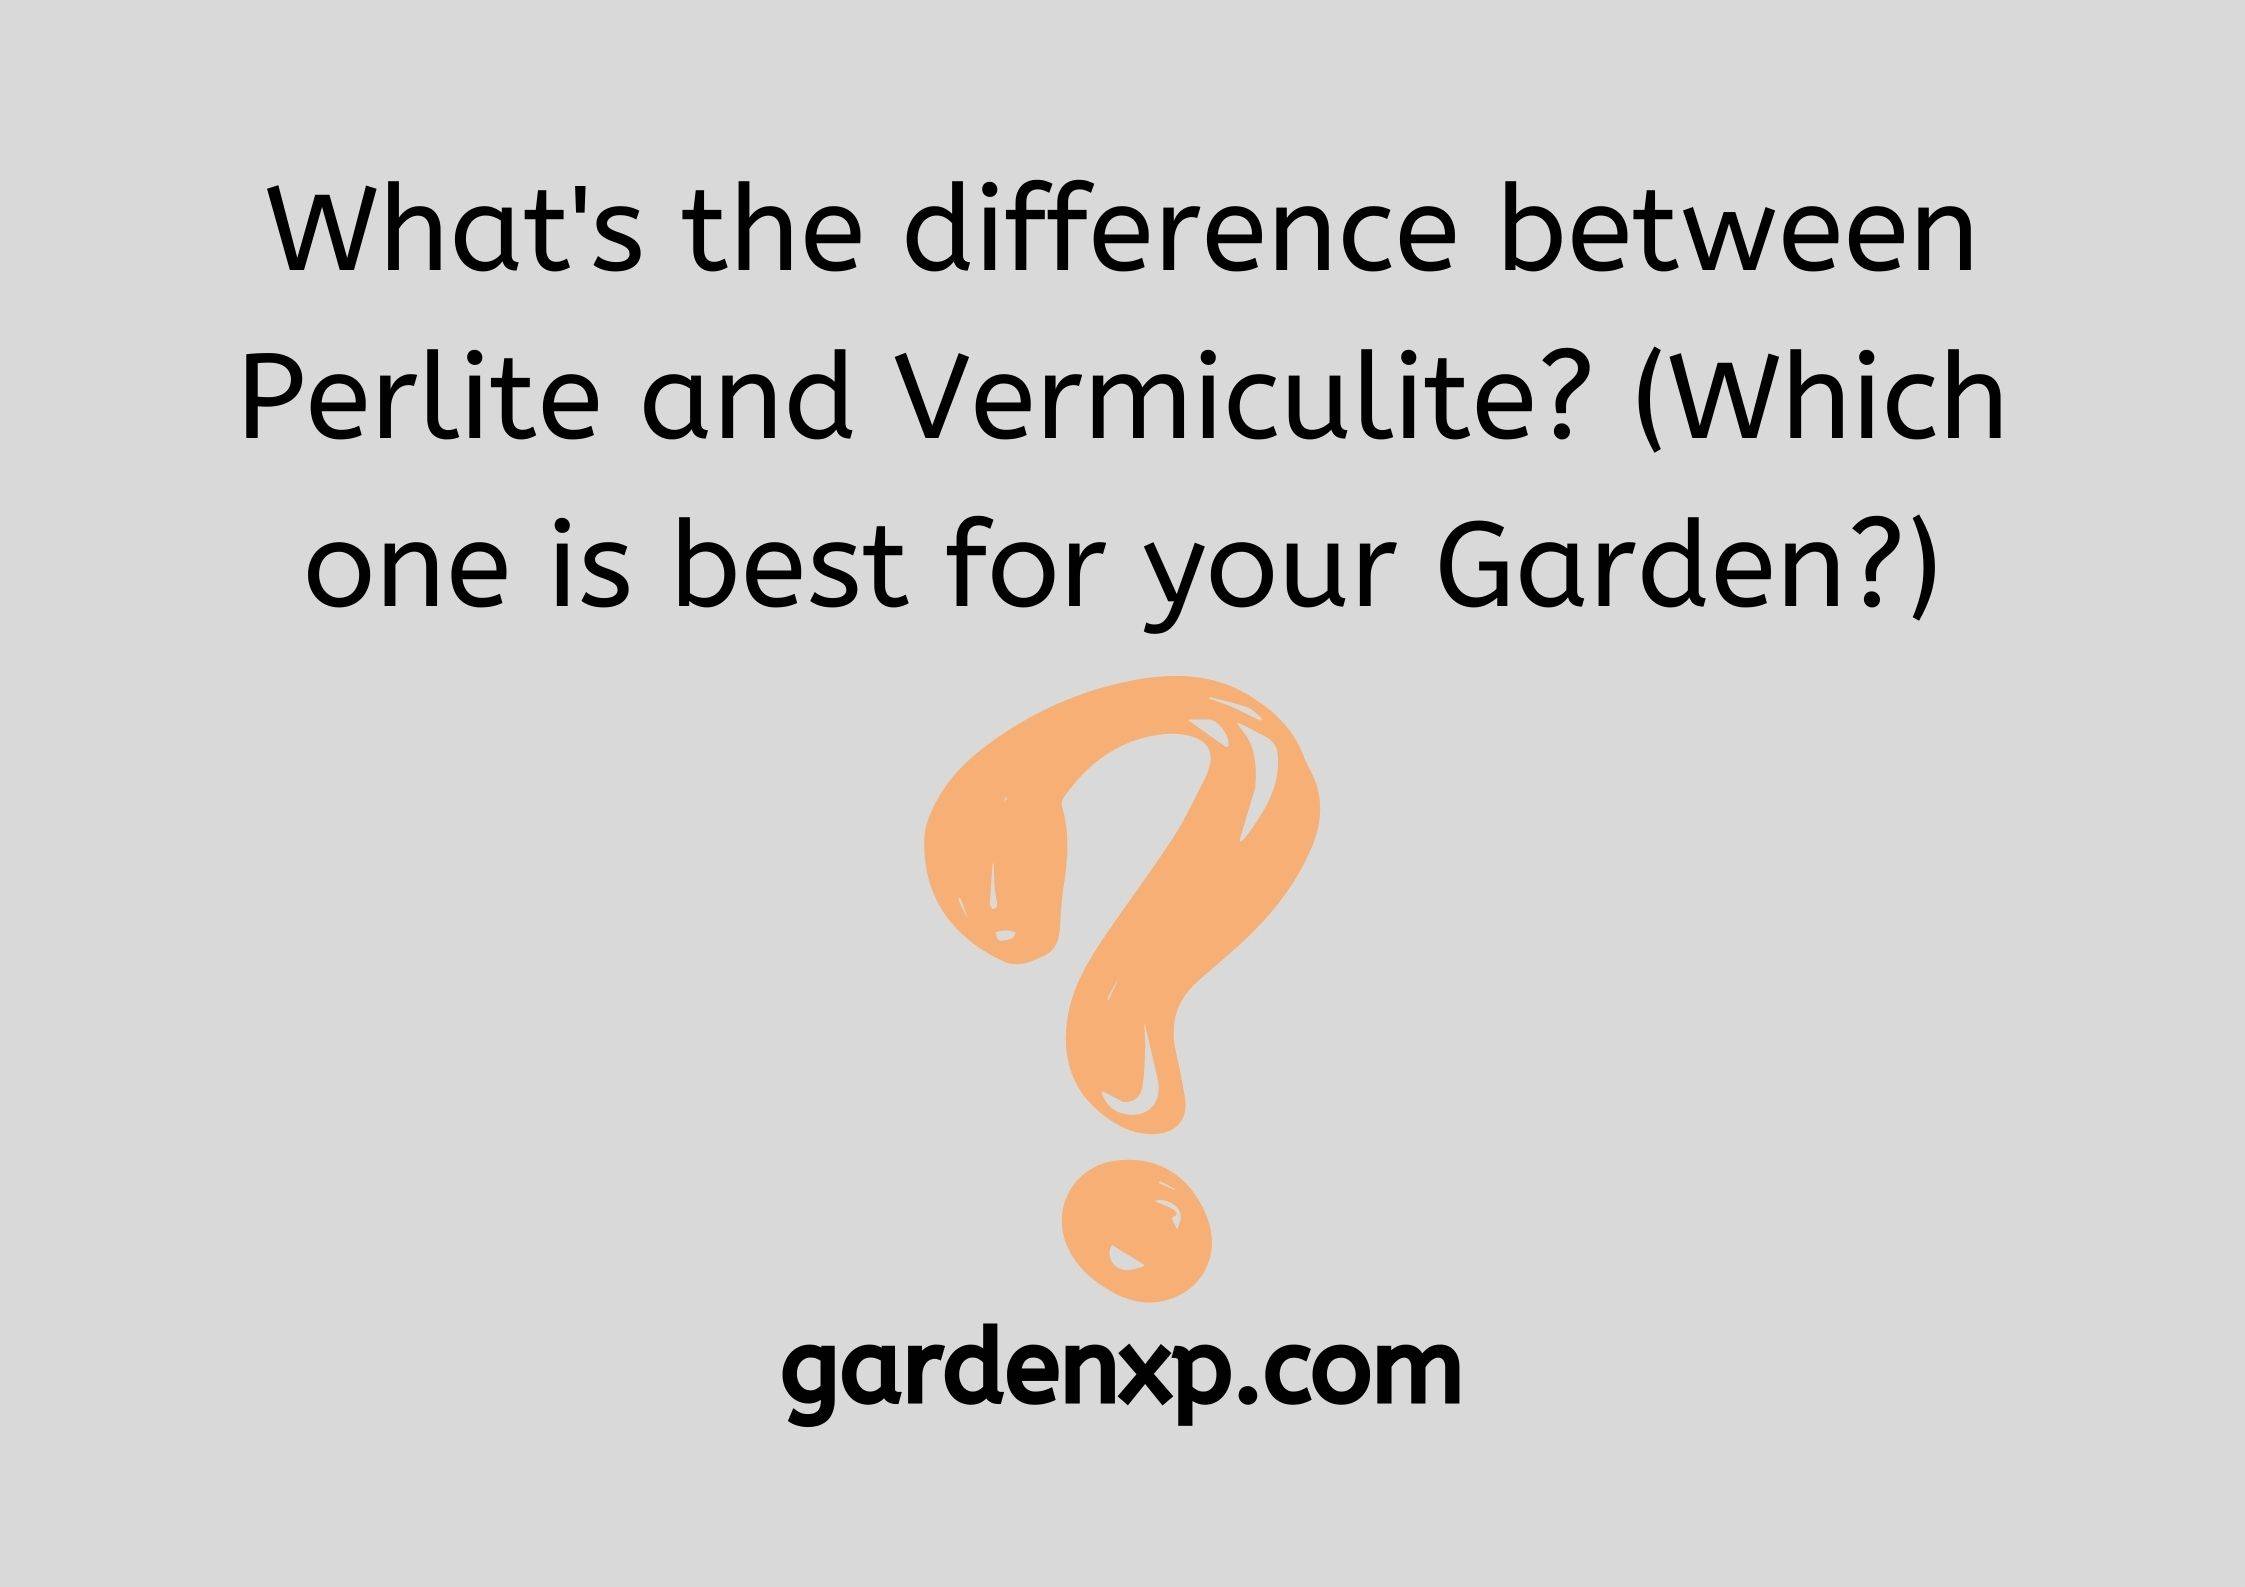 What's the difference between Perlite and Vermiculite? (Which one is best for your Garden?)